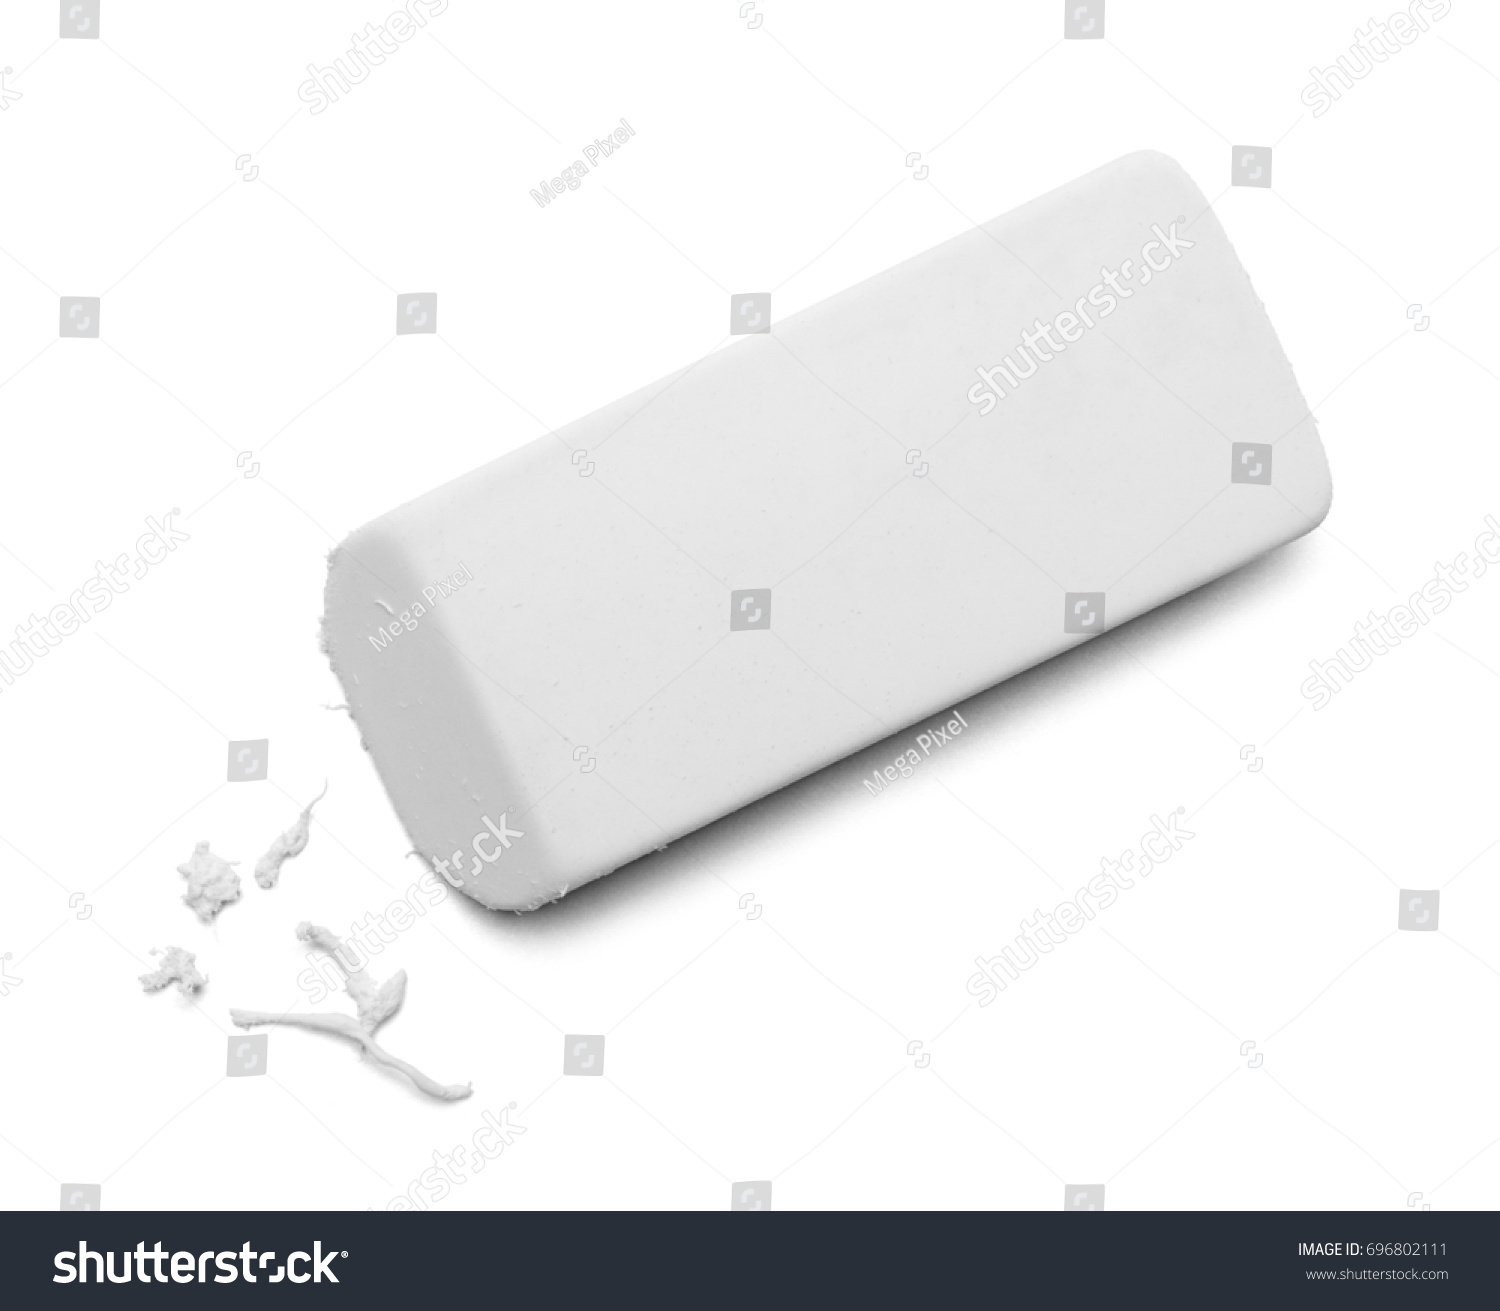 Used White Eraser Top View Isolated on White Background. #696802111